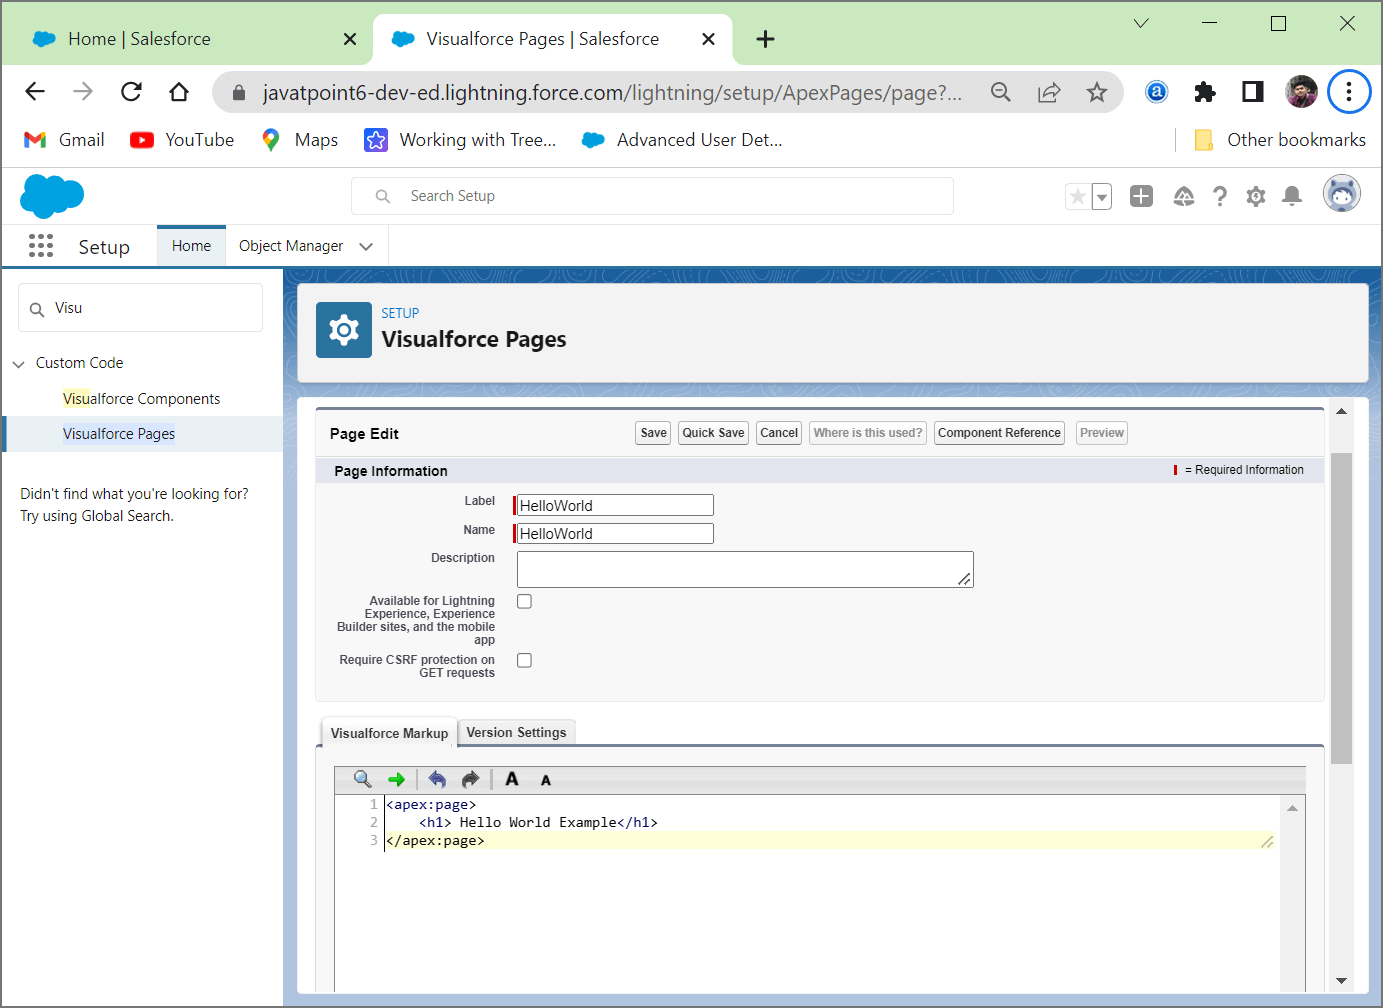 Creating the First Visualforce Page in Salesforce